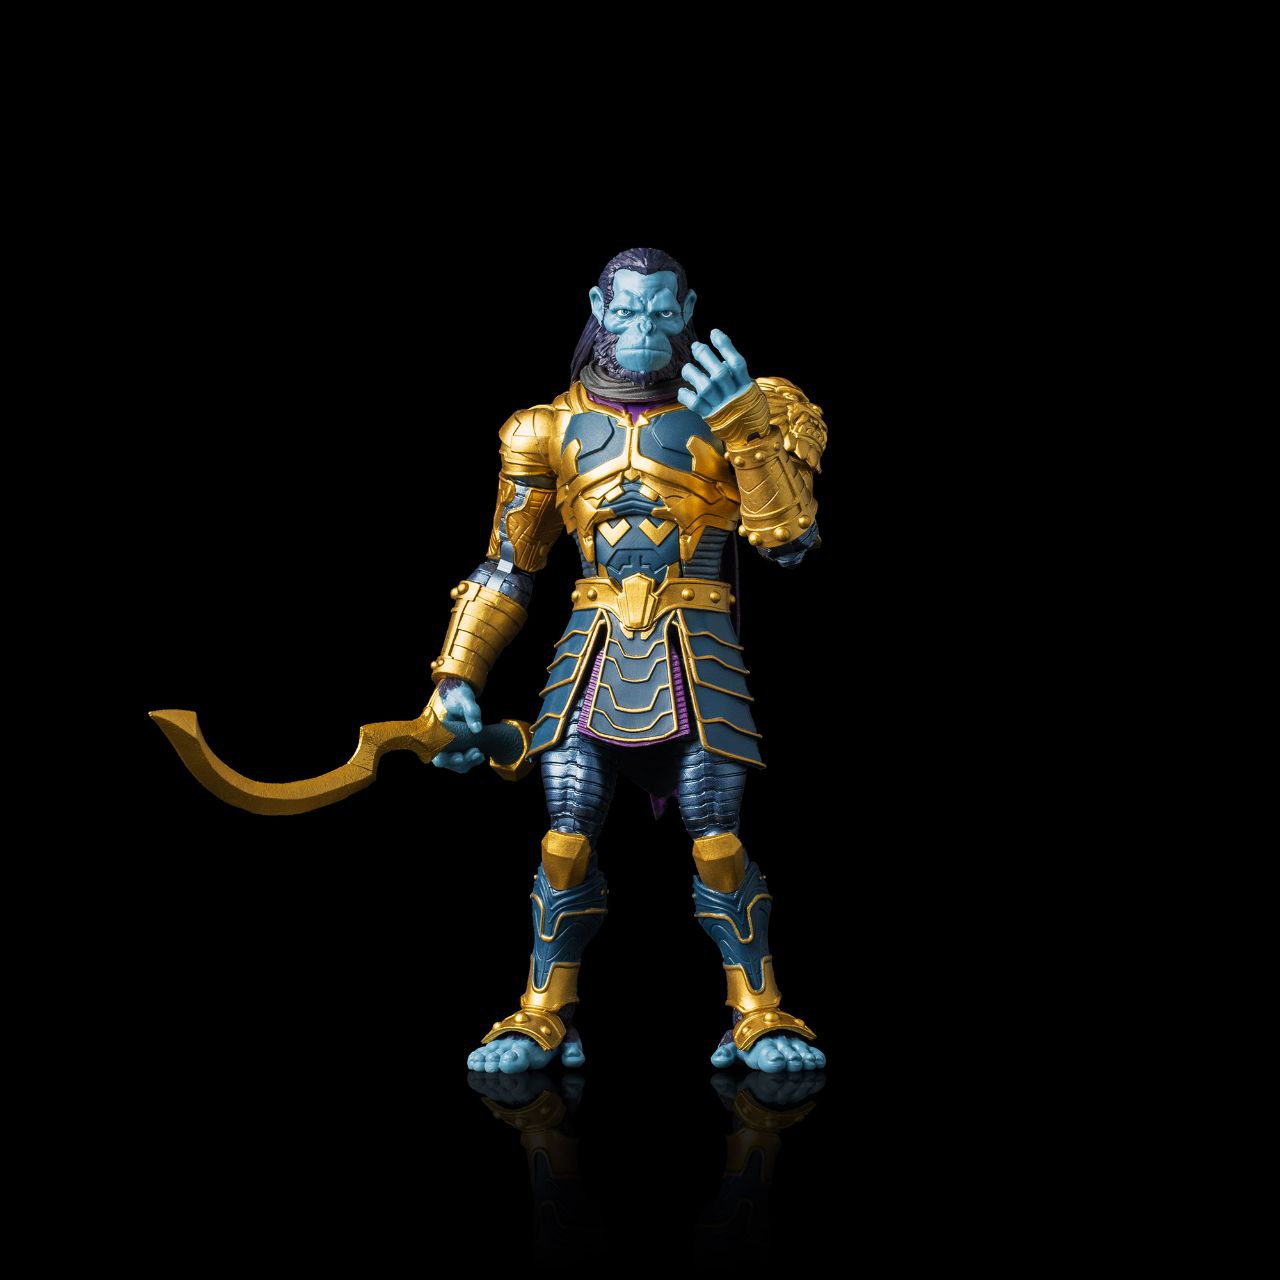 Animal Warriors of the Kingdom Primal Series Kah Lee: Conquest Armor